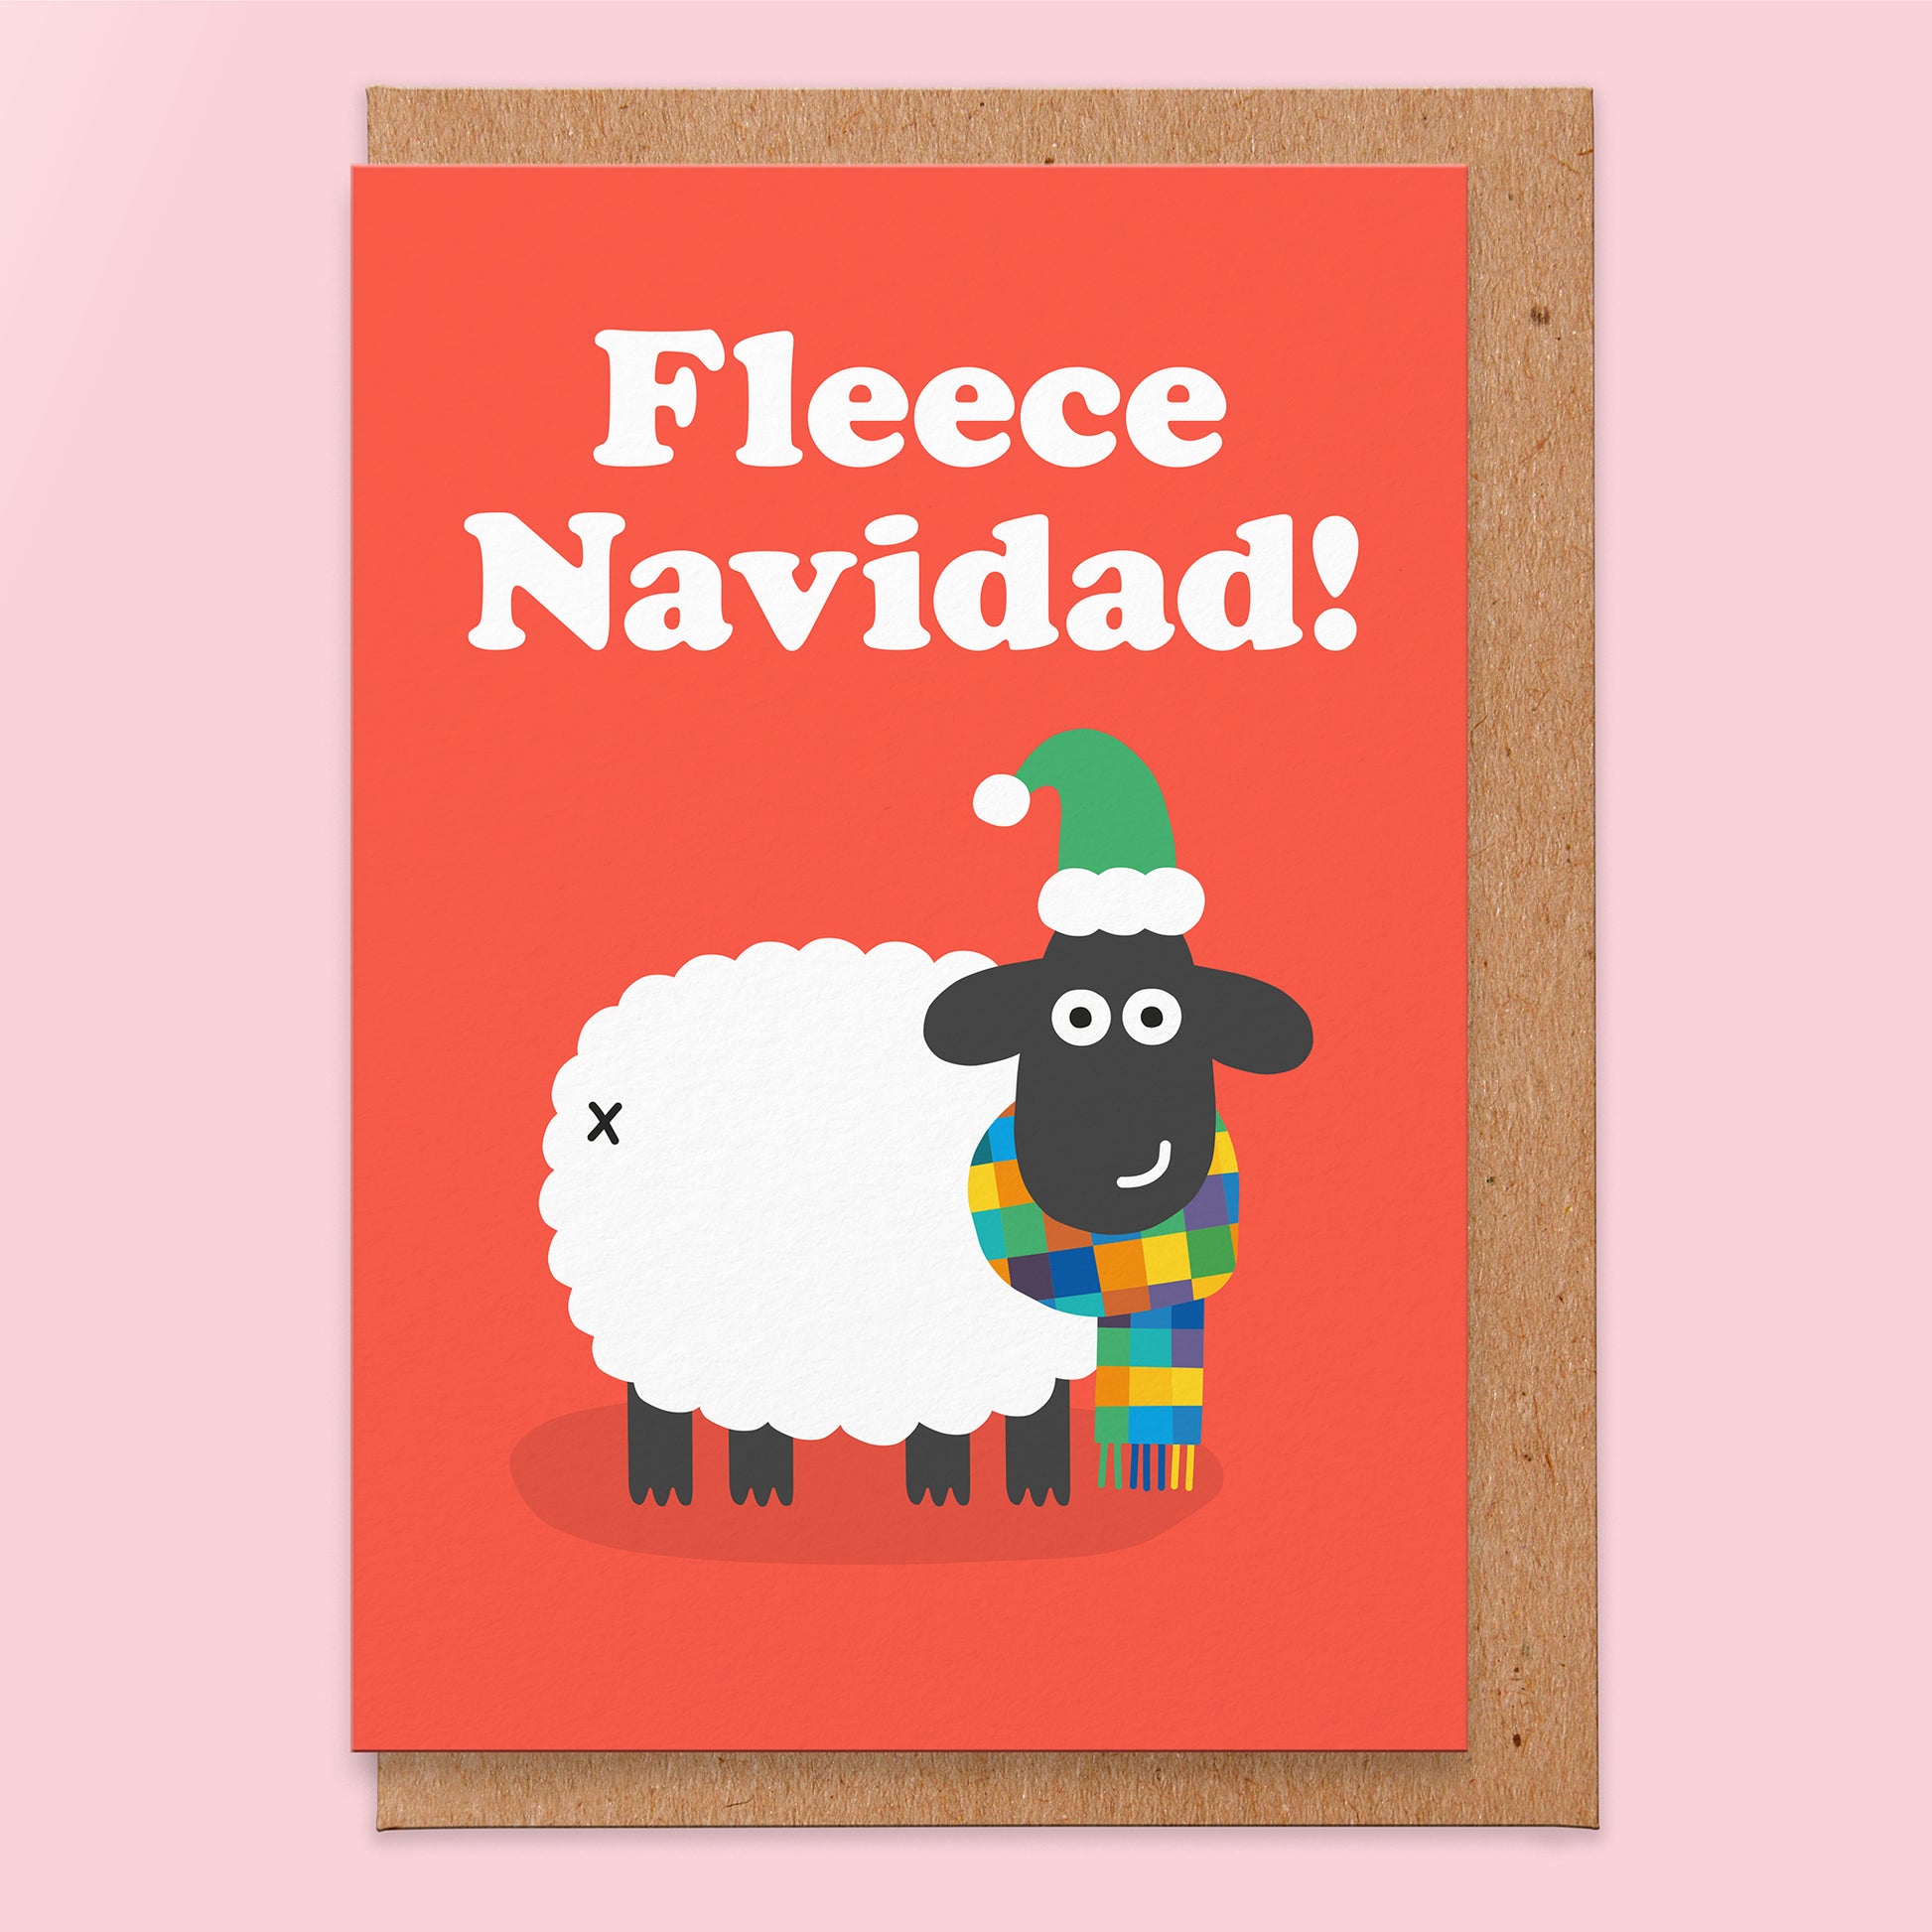 Christmas greetings card with an illustration of a sheep wearing a green Santa hat and a multicoloured scarf and says Fleece Navidad!